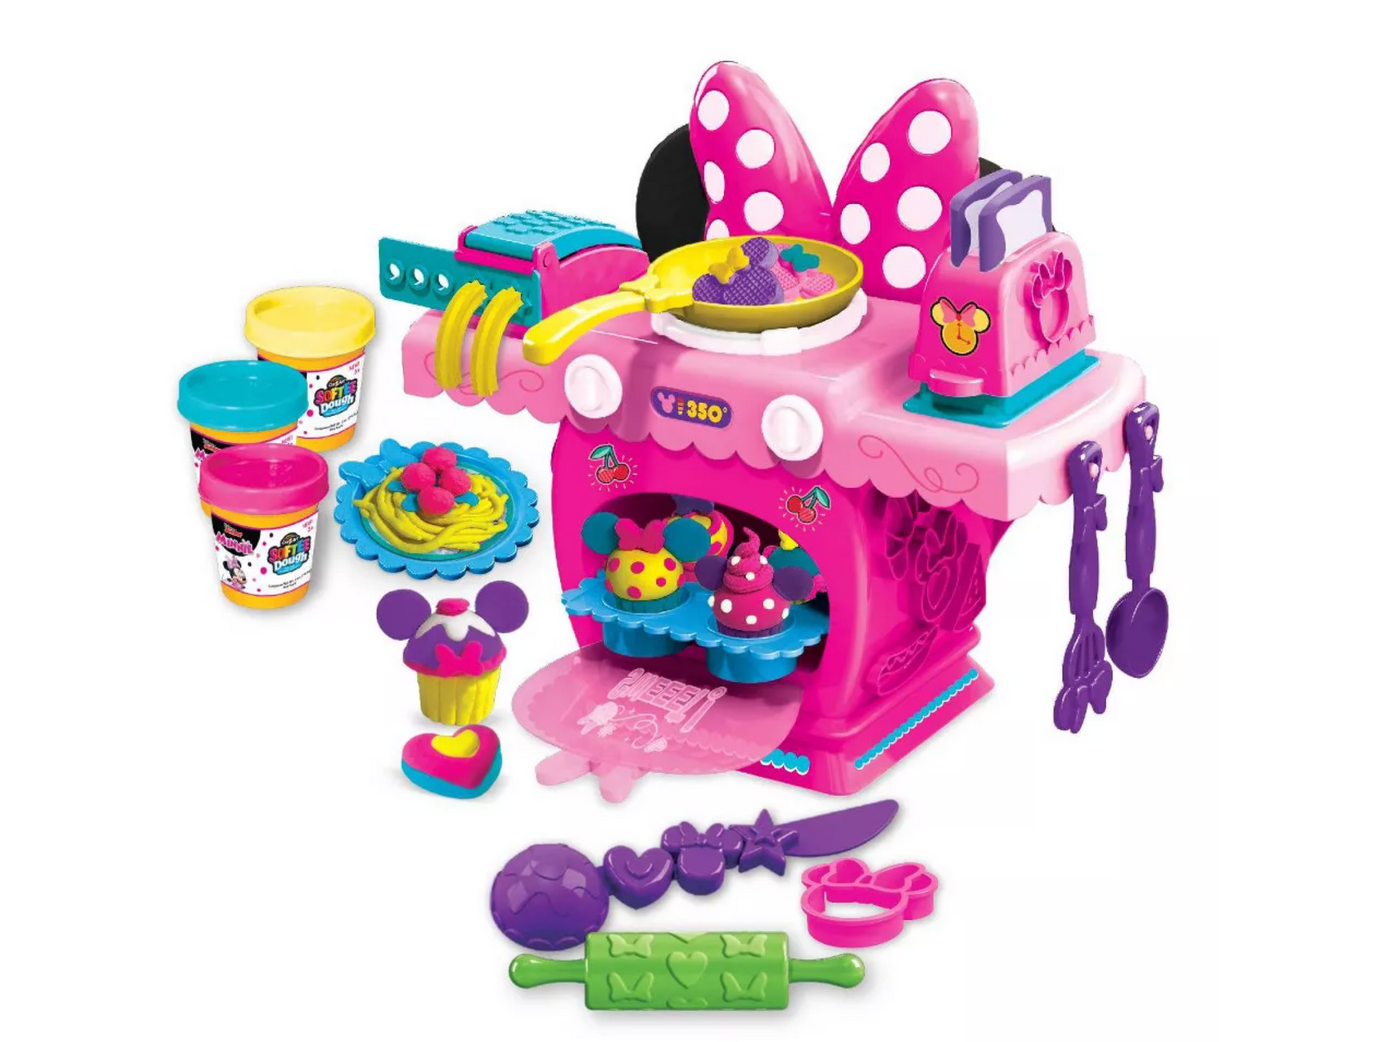 Disney Junior Minnie Mold and Play Kitchen Toy Set New with Box